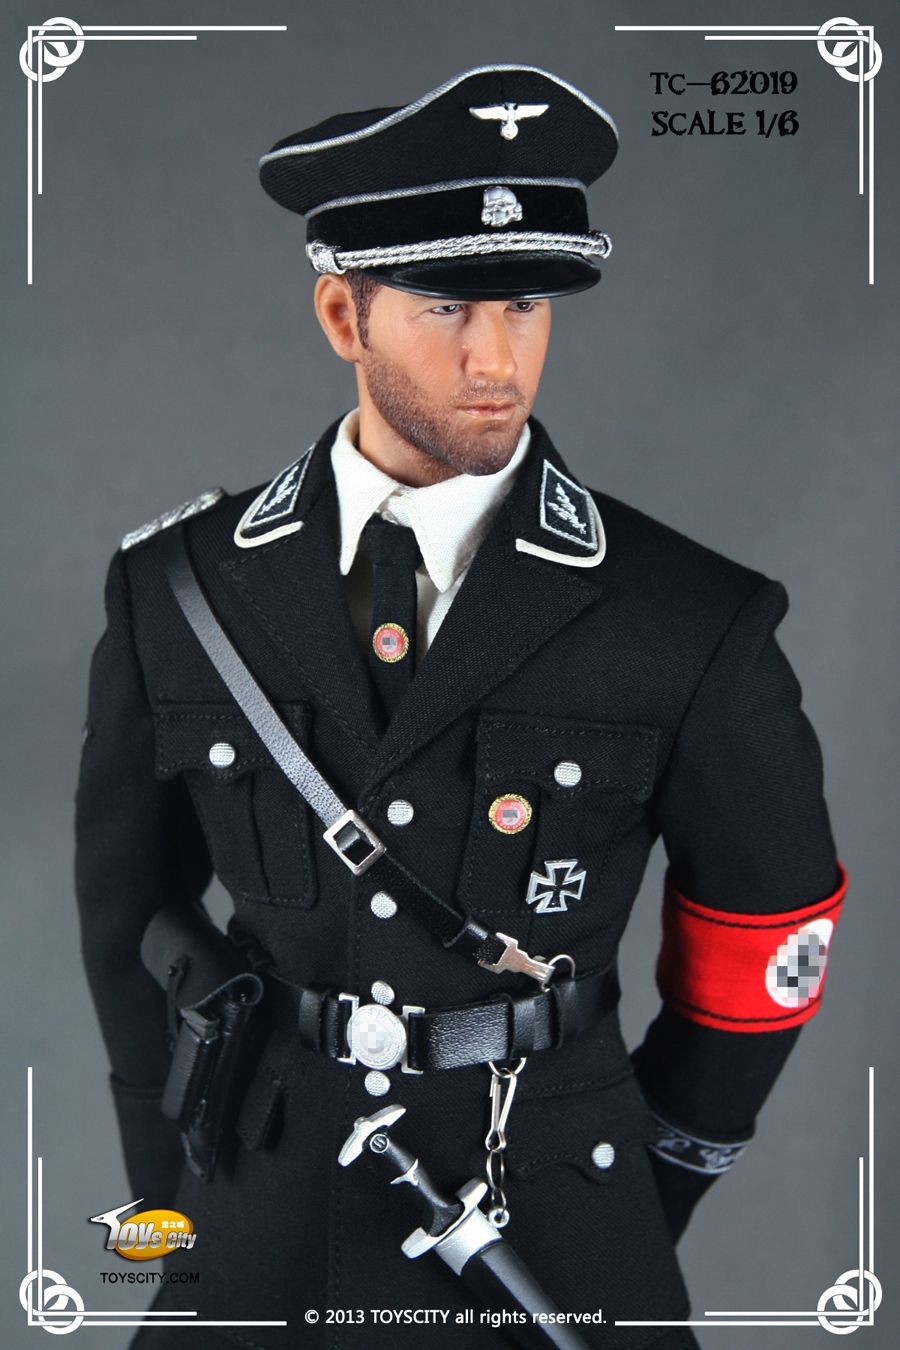 MOVIE SCALE: Achtung! Toys City 1/6 scale Waffen-SS Officer's Black